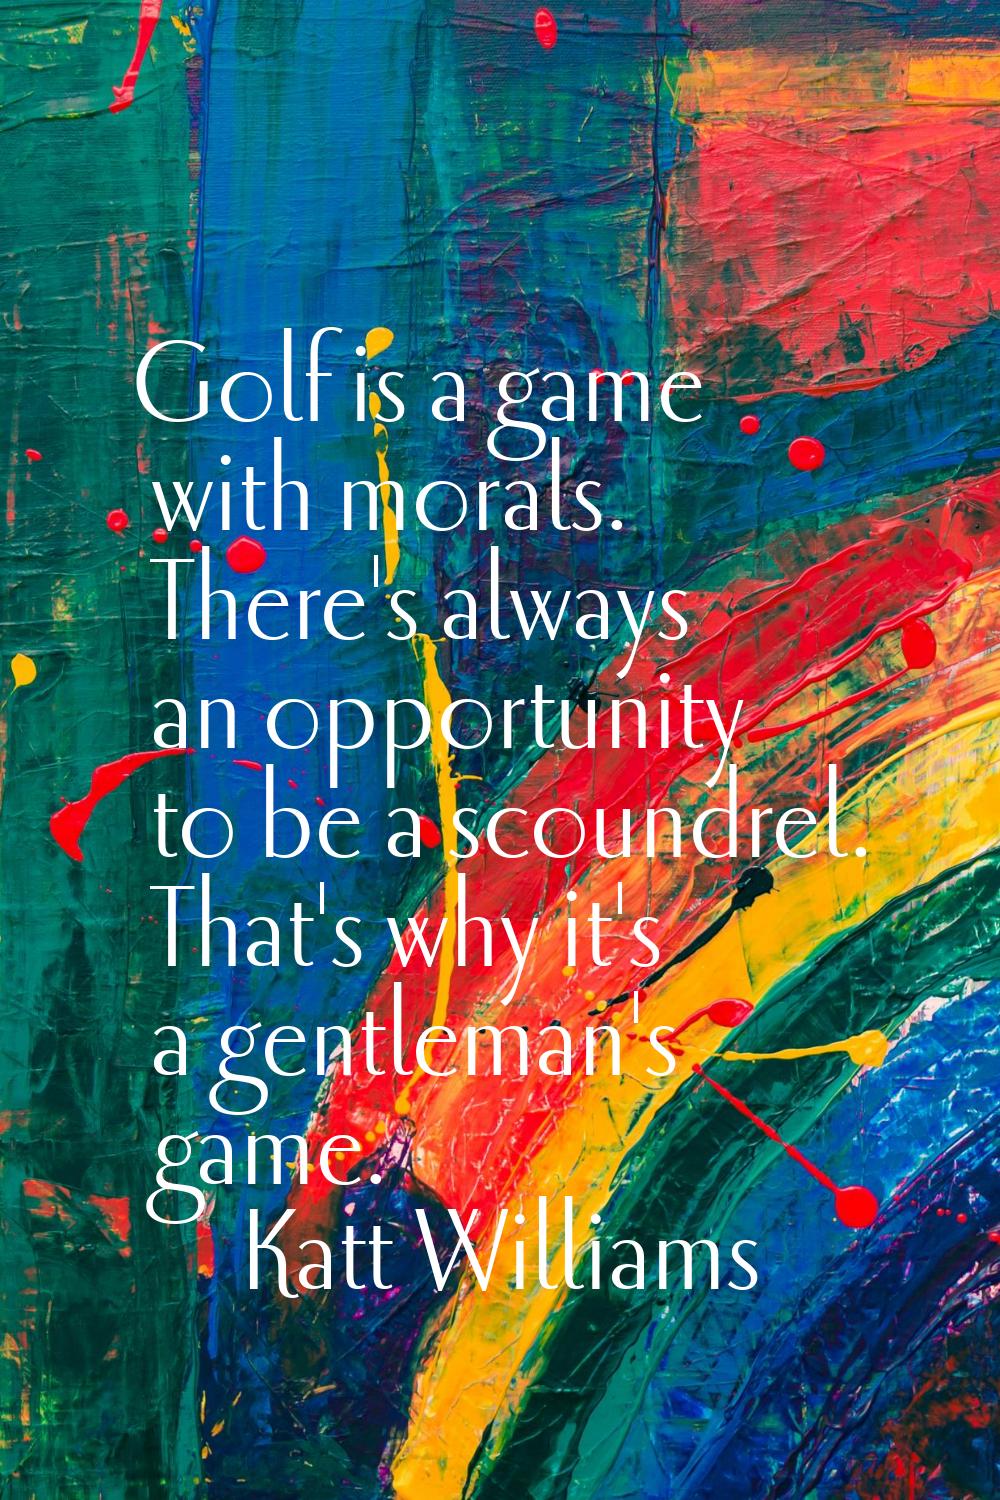 Golf is a game with morals. There's always an opportunity to be a scoundrel. That's why it's a gent